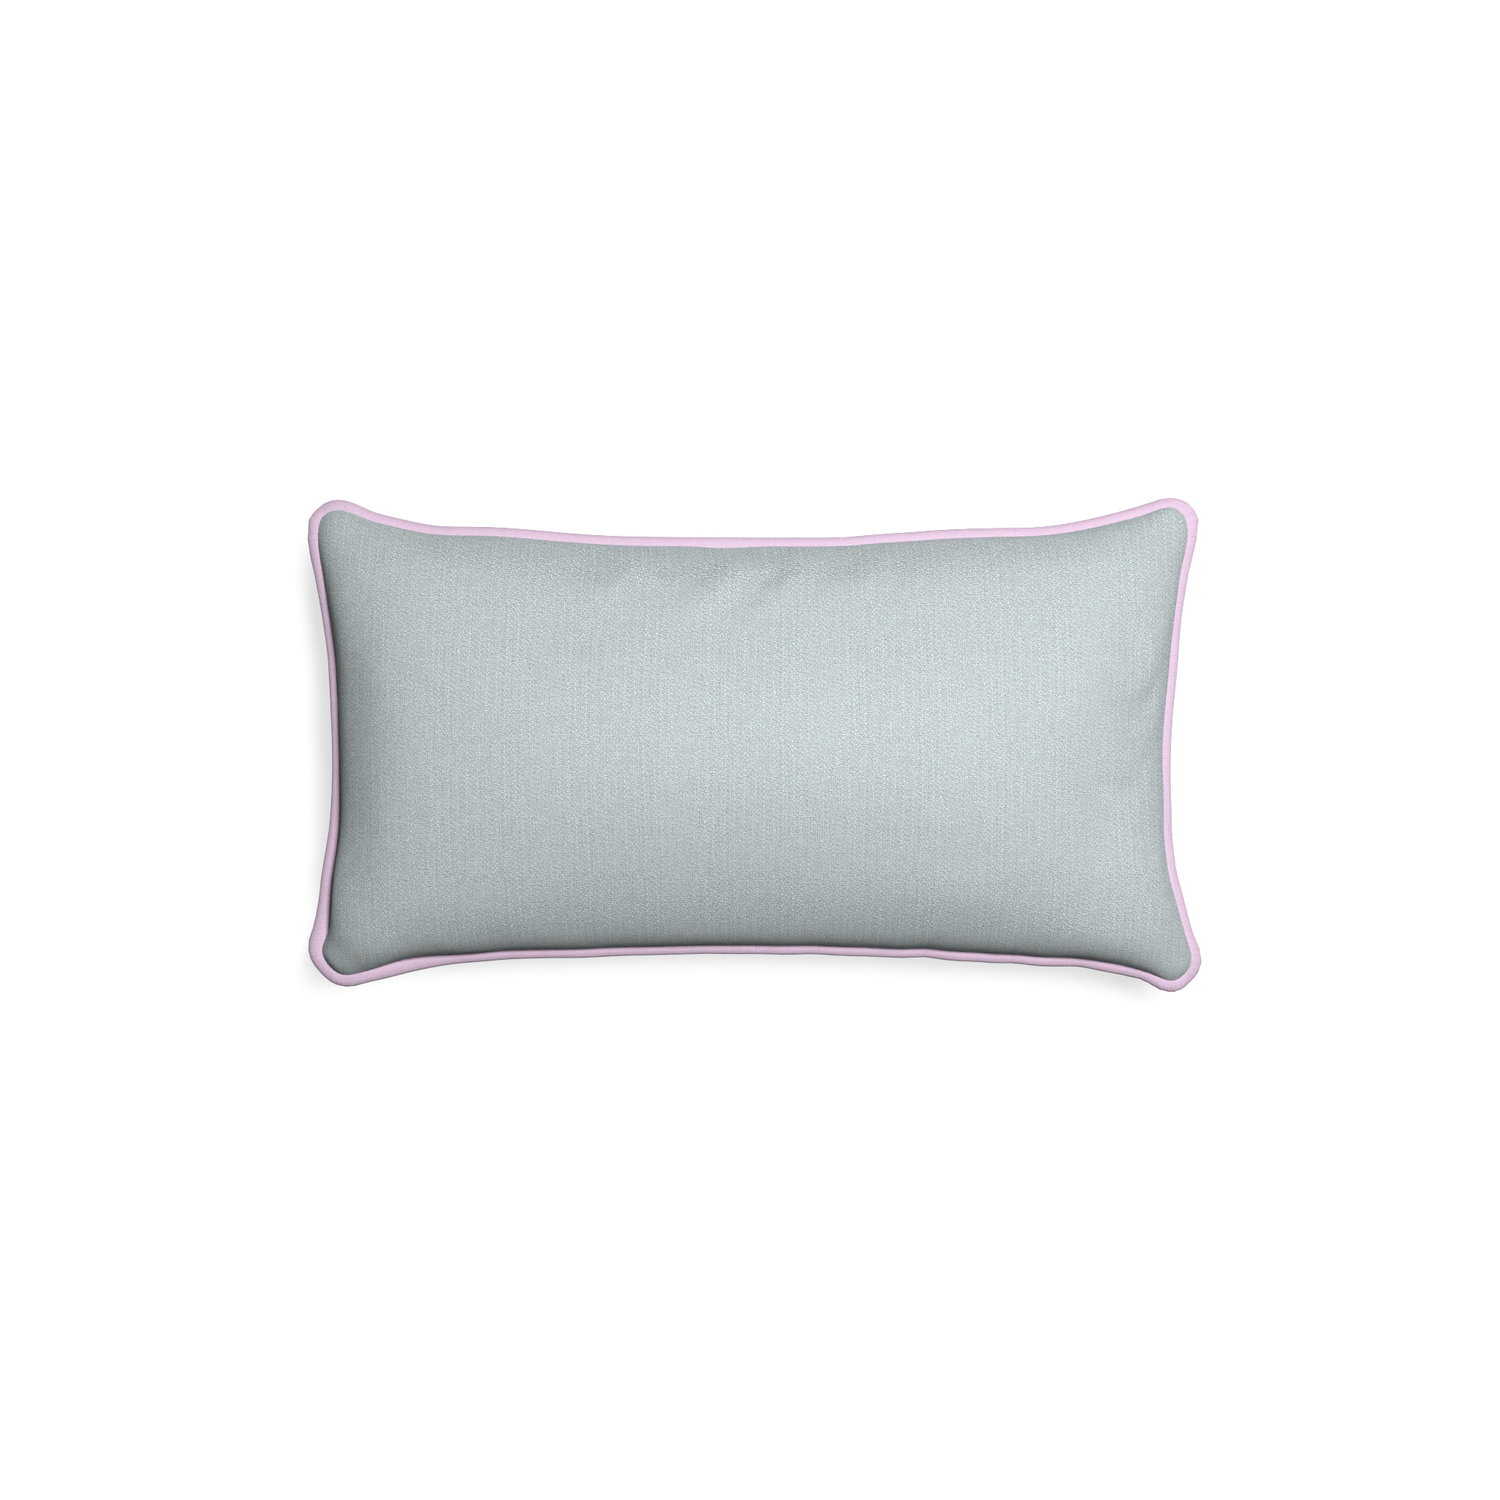 Petite-lumbar sea custom grey bluepillow with l piping on white background